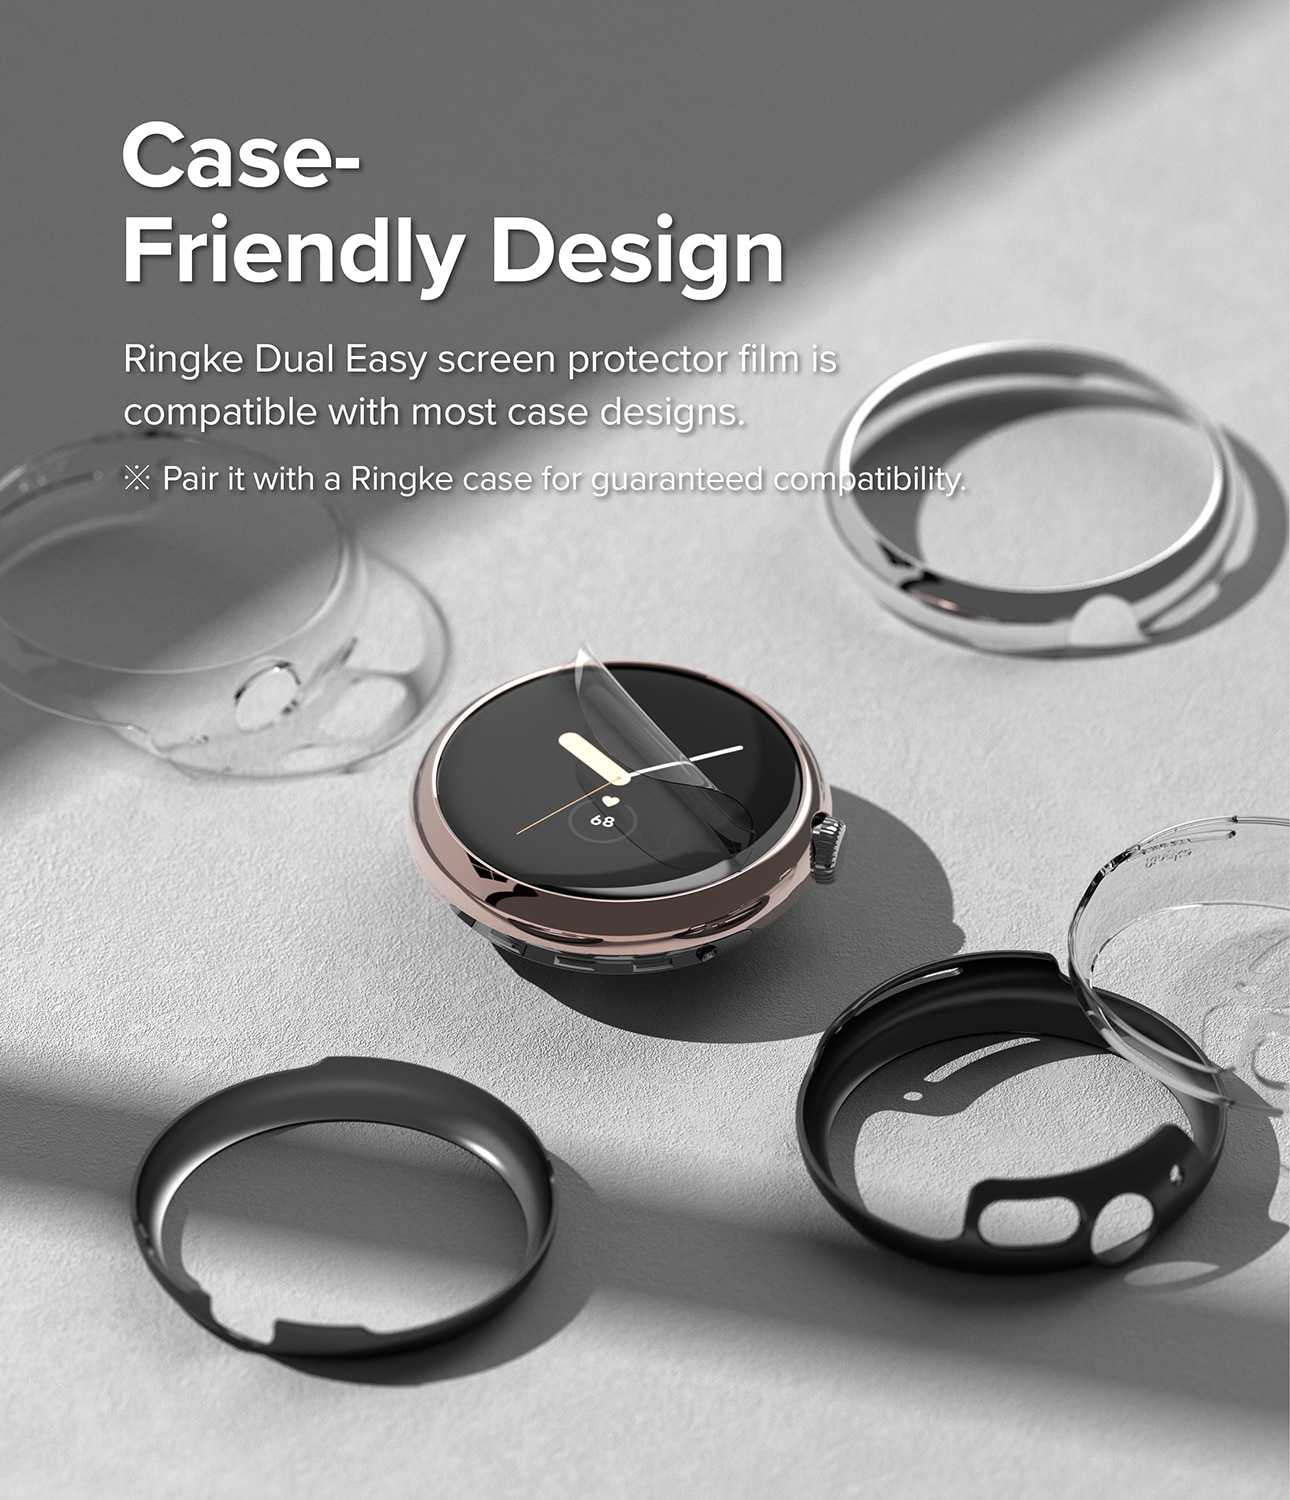 Dual Easy Screen Protector (3 pièces) Google Pixel Watch 2